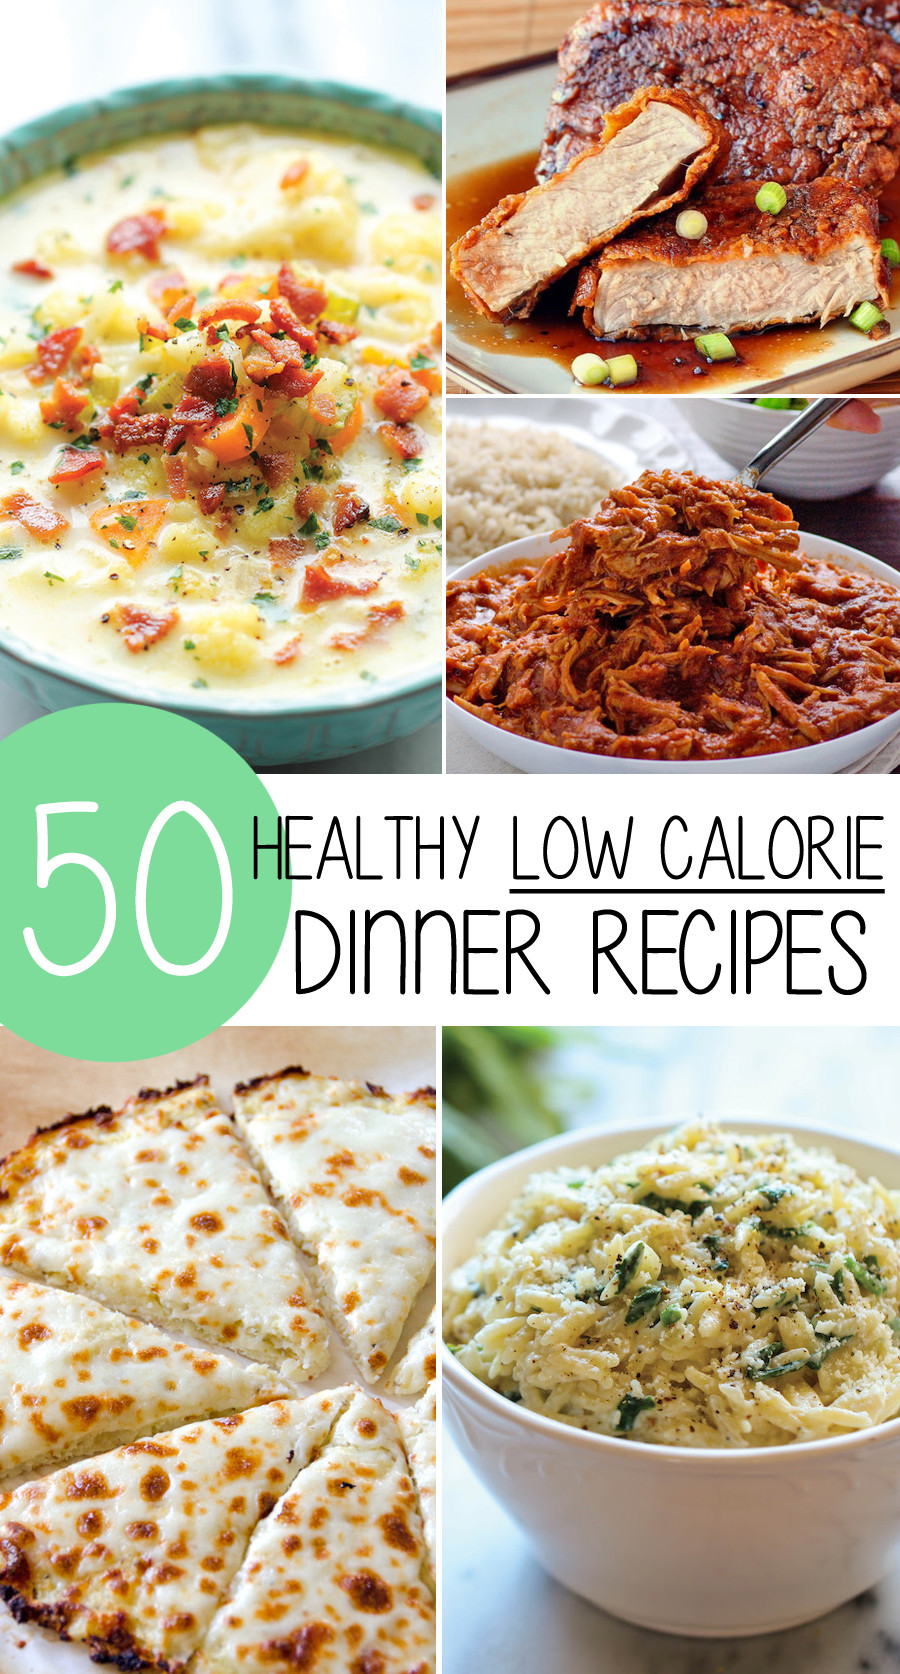 Easy Low Calorie Recipes
 50 Healthy Low Calorie Weight Loss Dinner Recipes